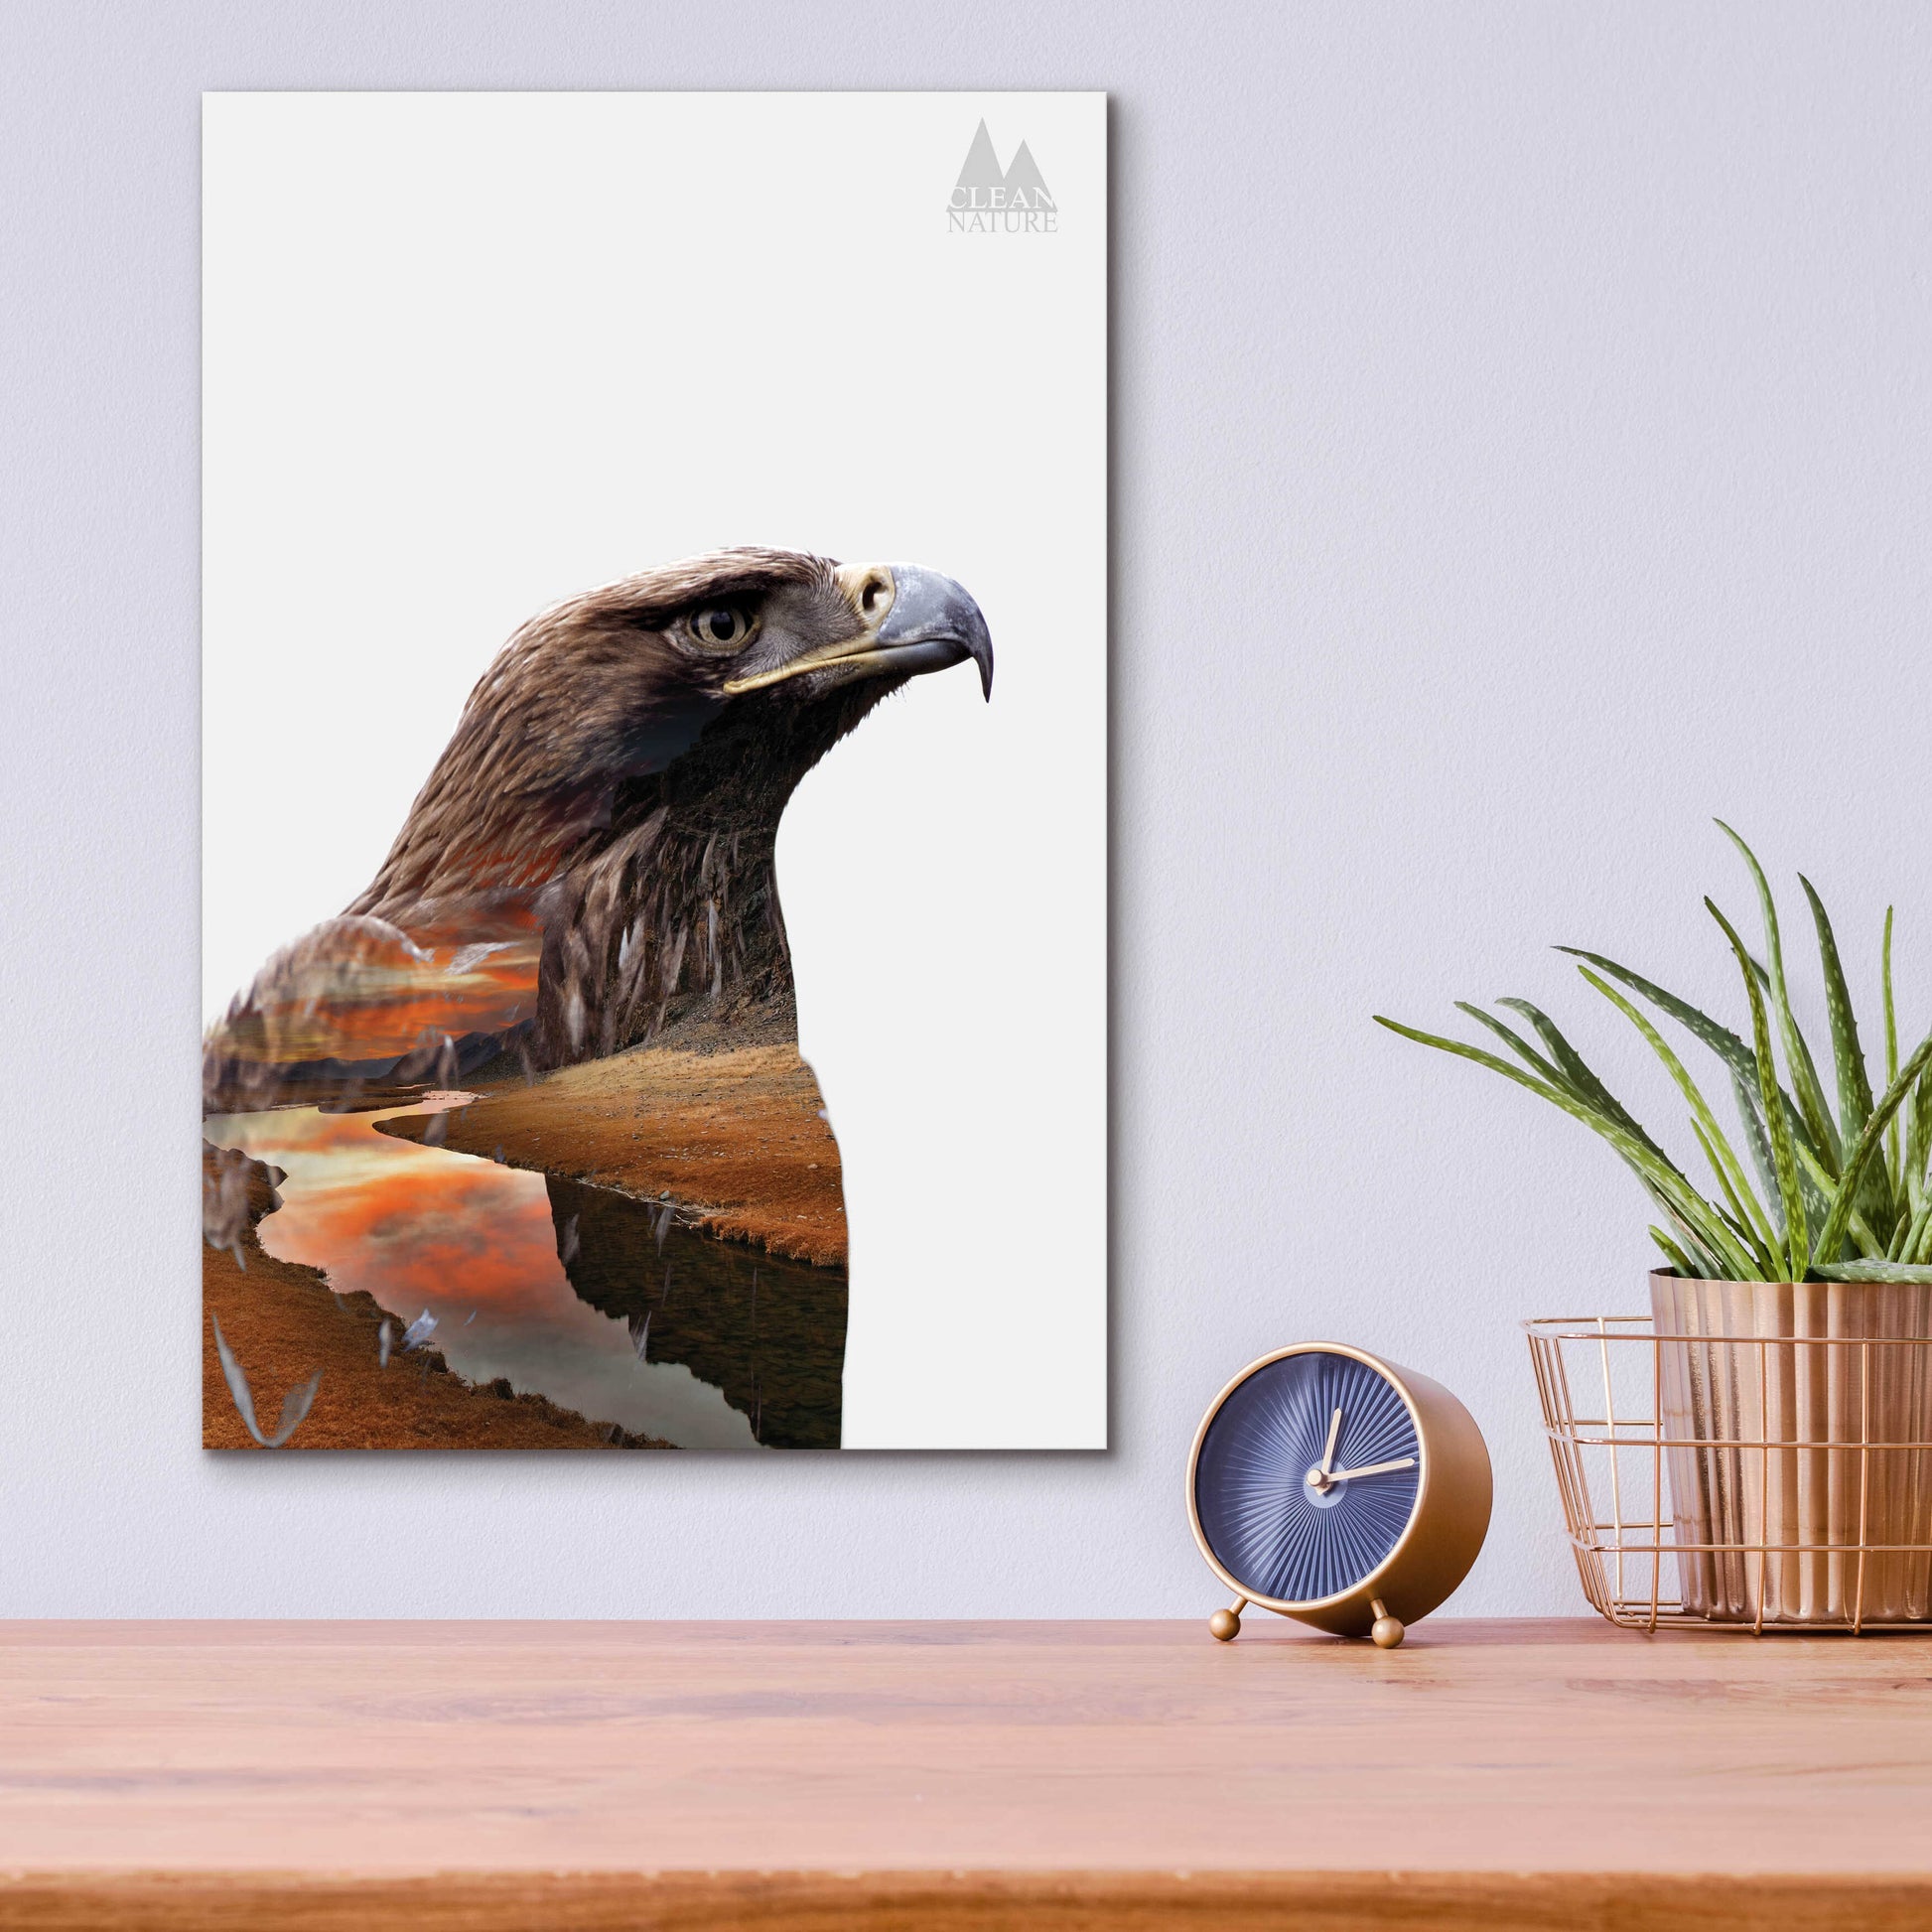 Epic Art 'Eagle' by Clean Nature, Acrylic Glass Wall Art,12x16